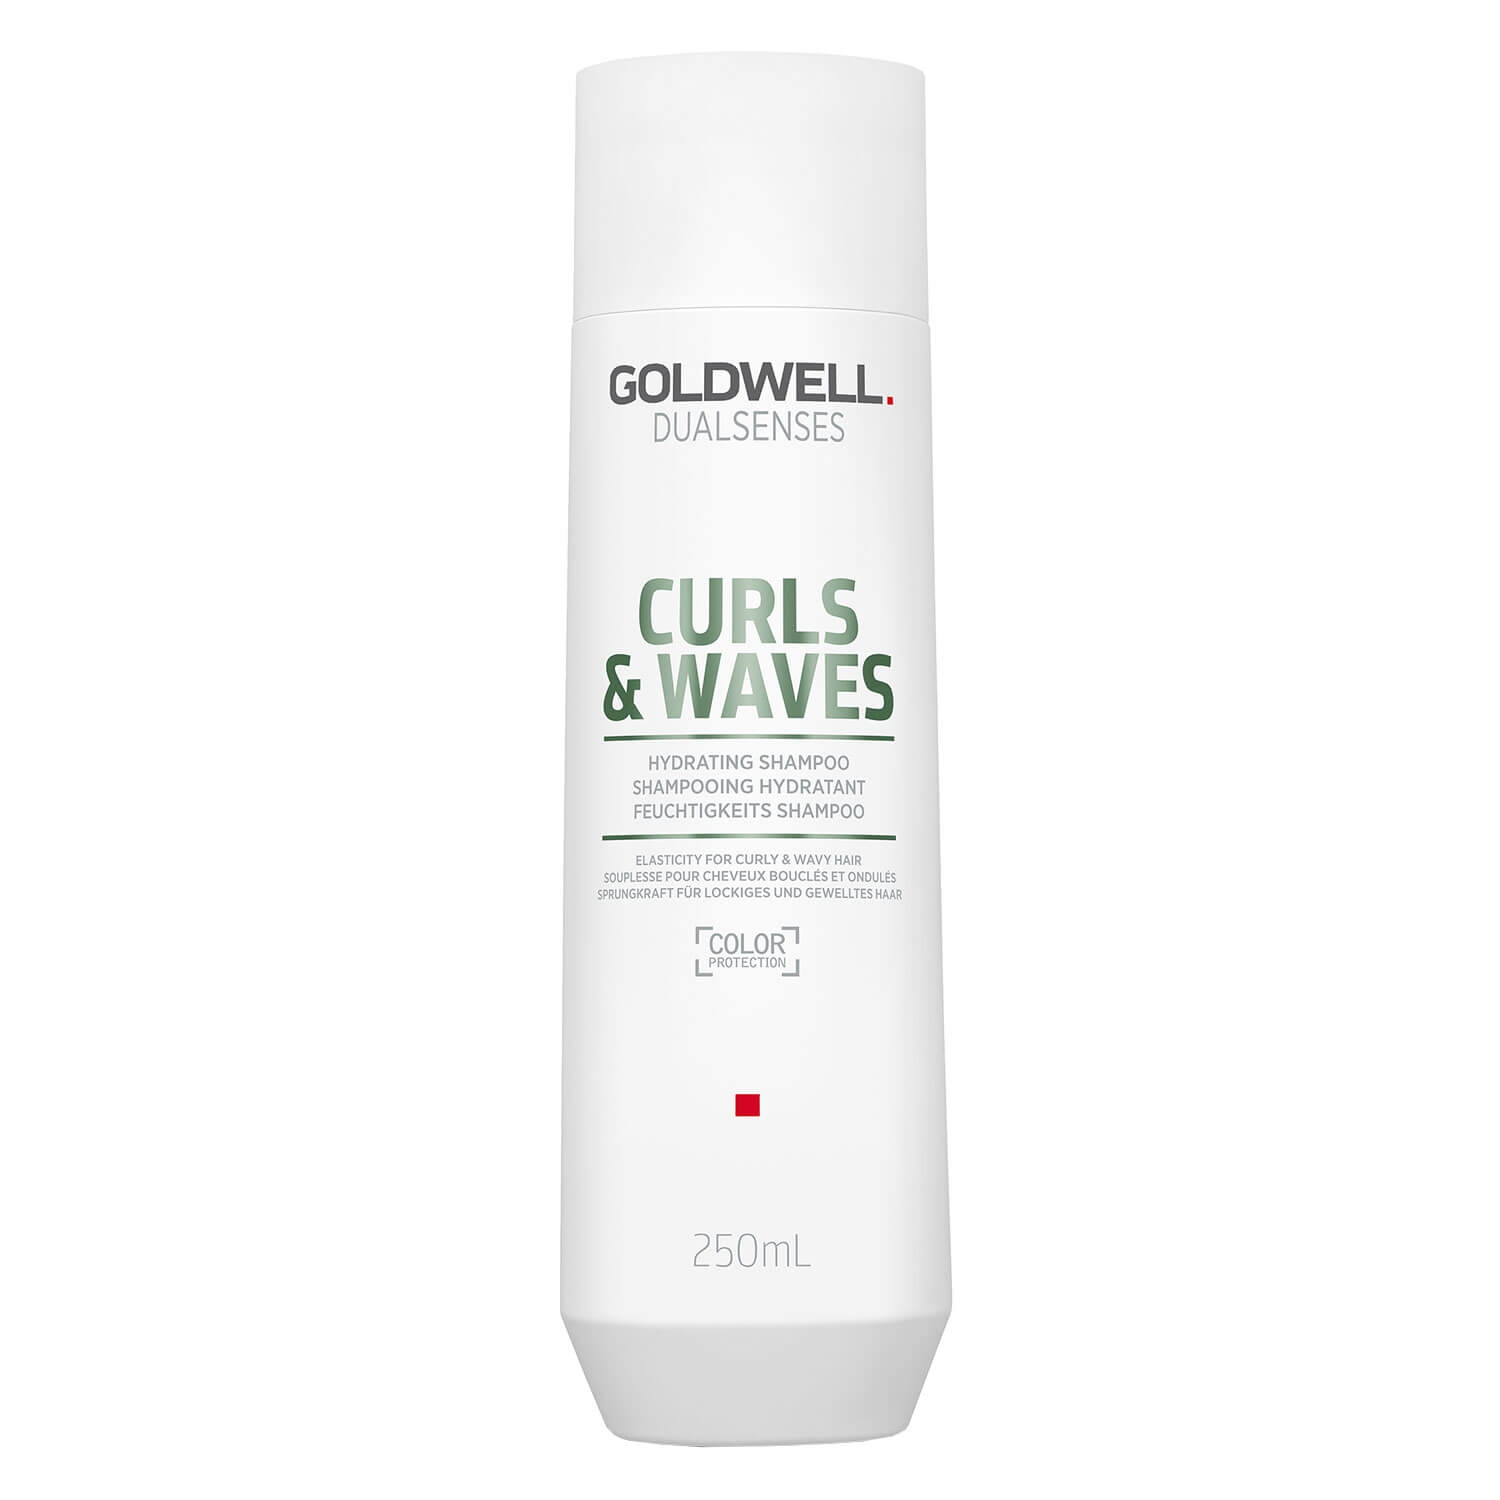 Product image from Dualsenses Curls & Waves - Hydrating Shampoo